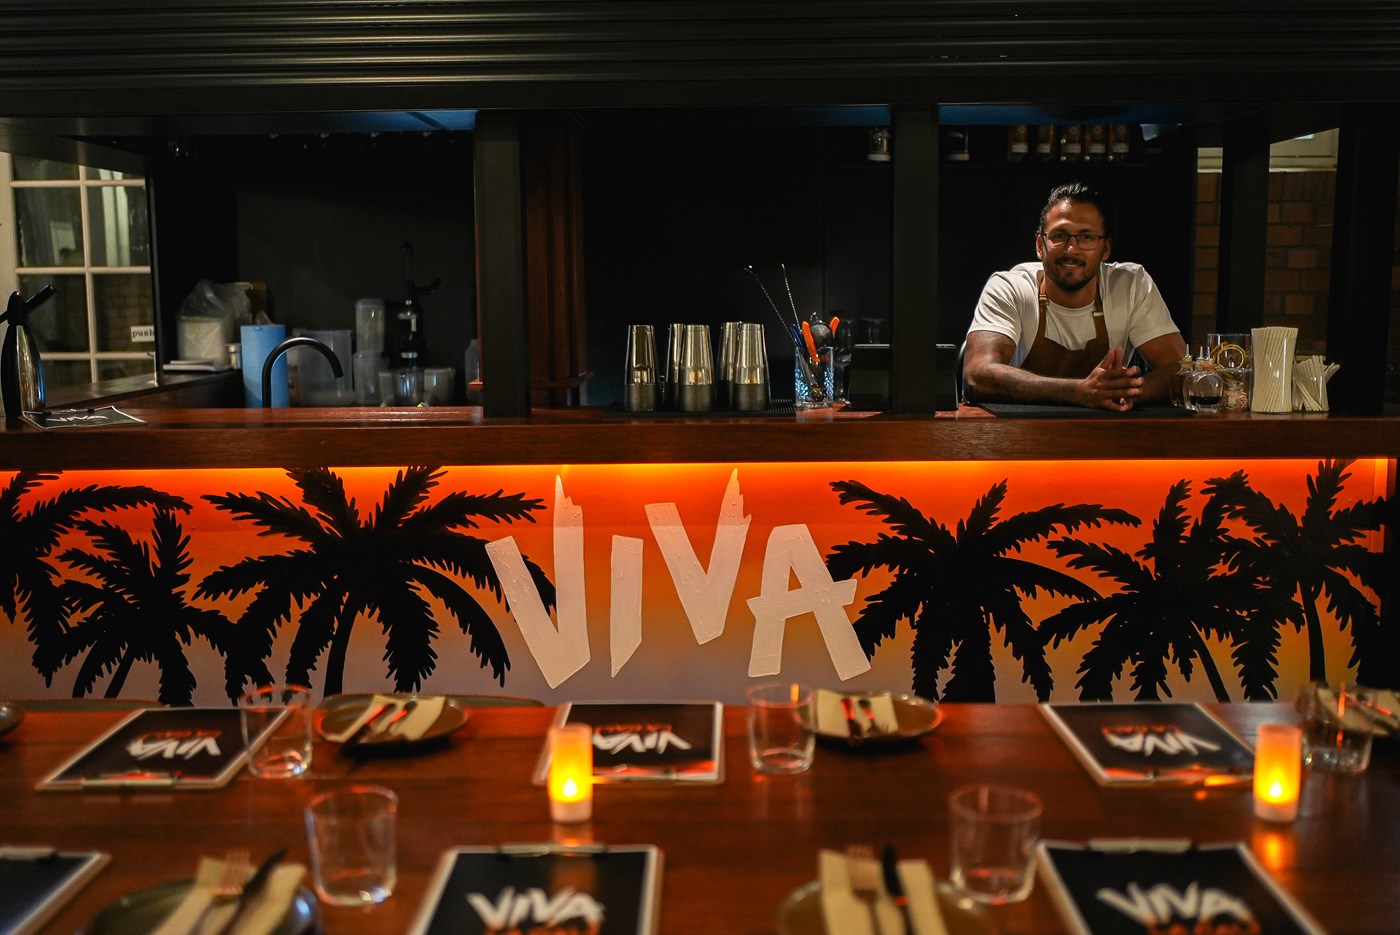 A dimly lit bar with "VIVA" and palm trees painted on the front. The bartender is smiling & leaning on the bar 